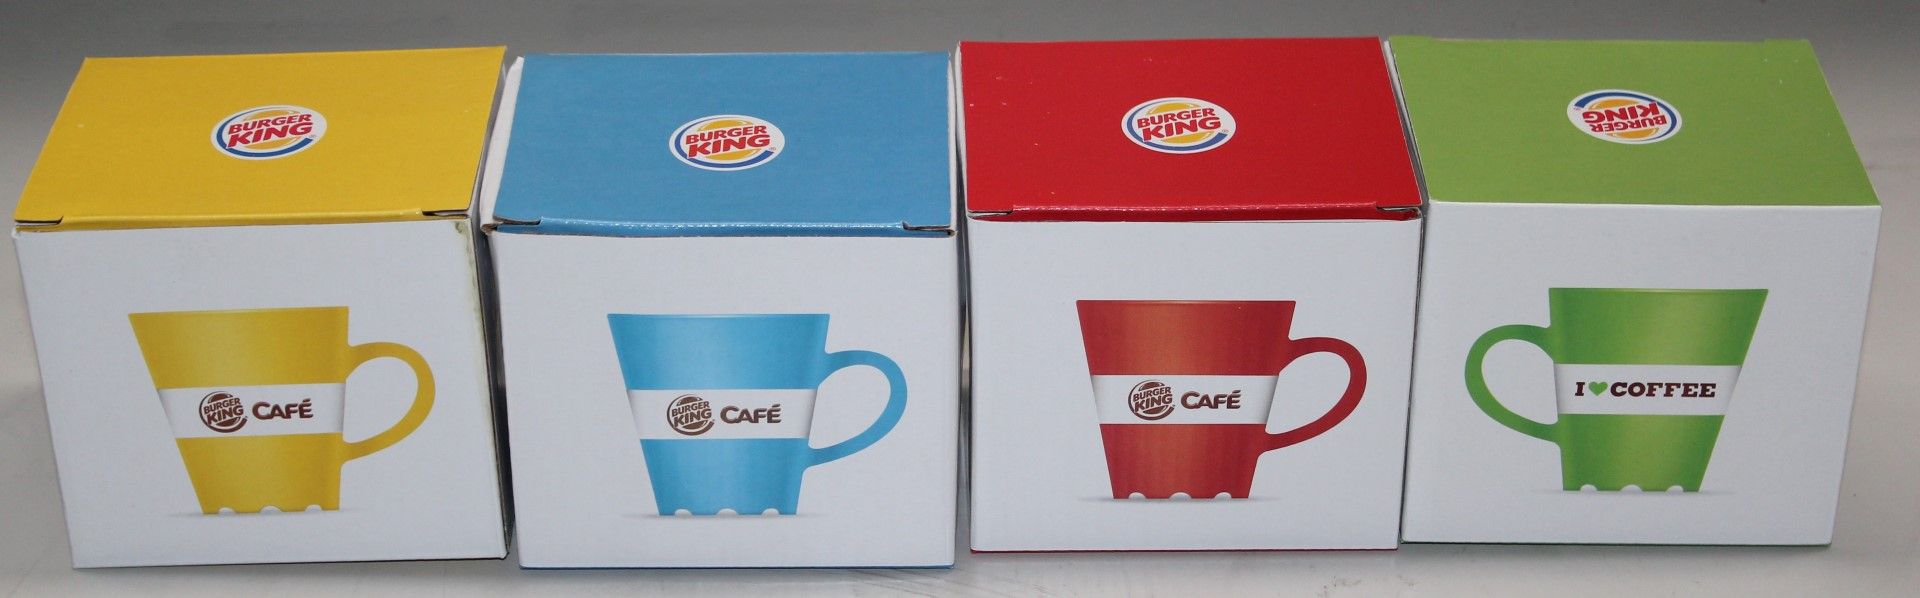 35 x Burger King Ceramic Coffee Mugs - Various Colours - Brand New Boxed Stock - CL011 - Location: - Image 3 of 5